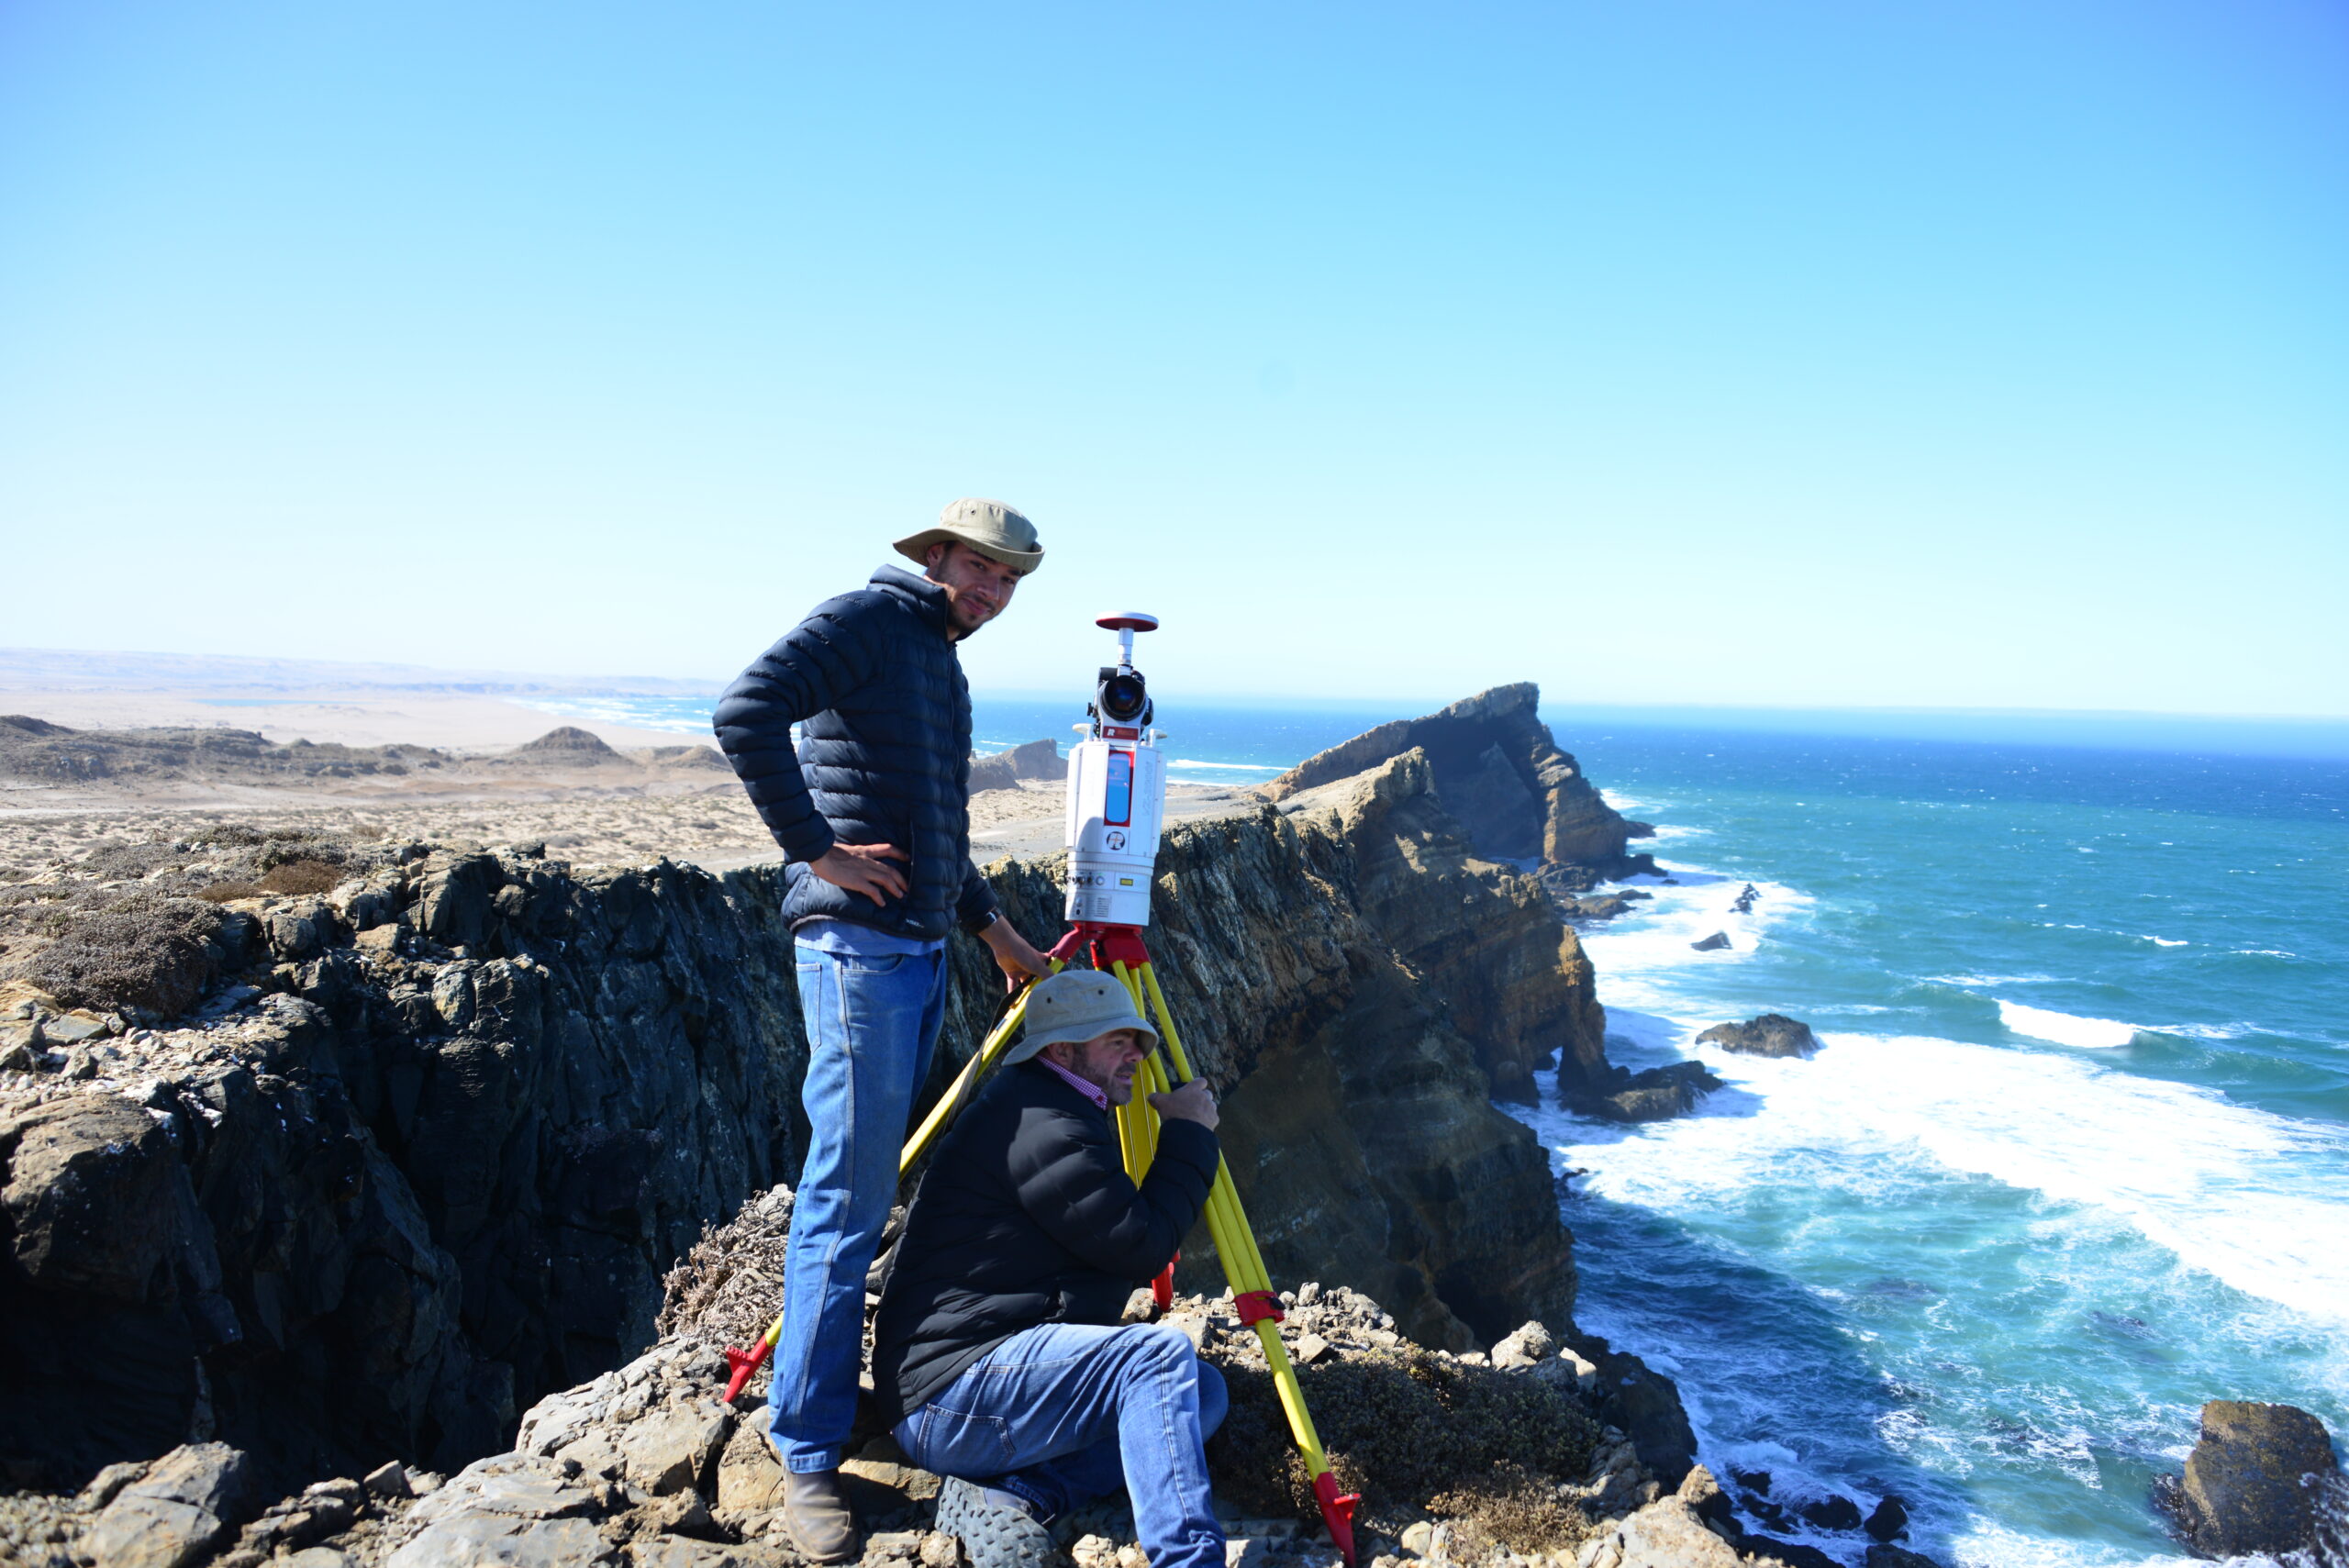 Herman Strydom and associate Guillaume van der Walt take a break and look out over the southern Atlantic Ocean with the RIEGL VZ-2000i on the remote Namibia coast. The remains are a part of Pomona, once a thriving diamond mining town in the African Sperrgebiet.